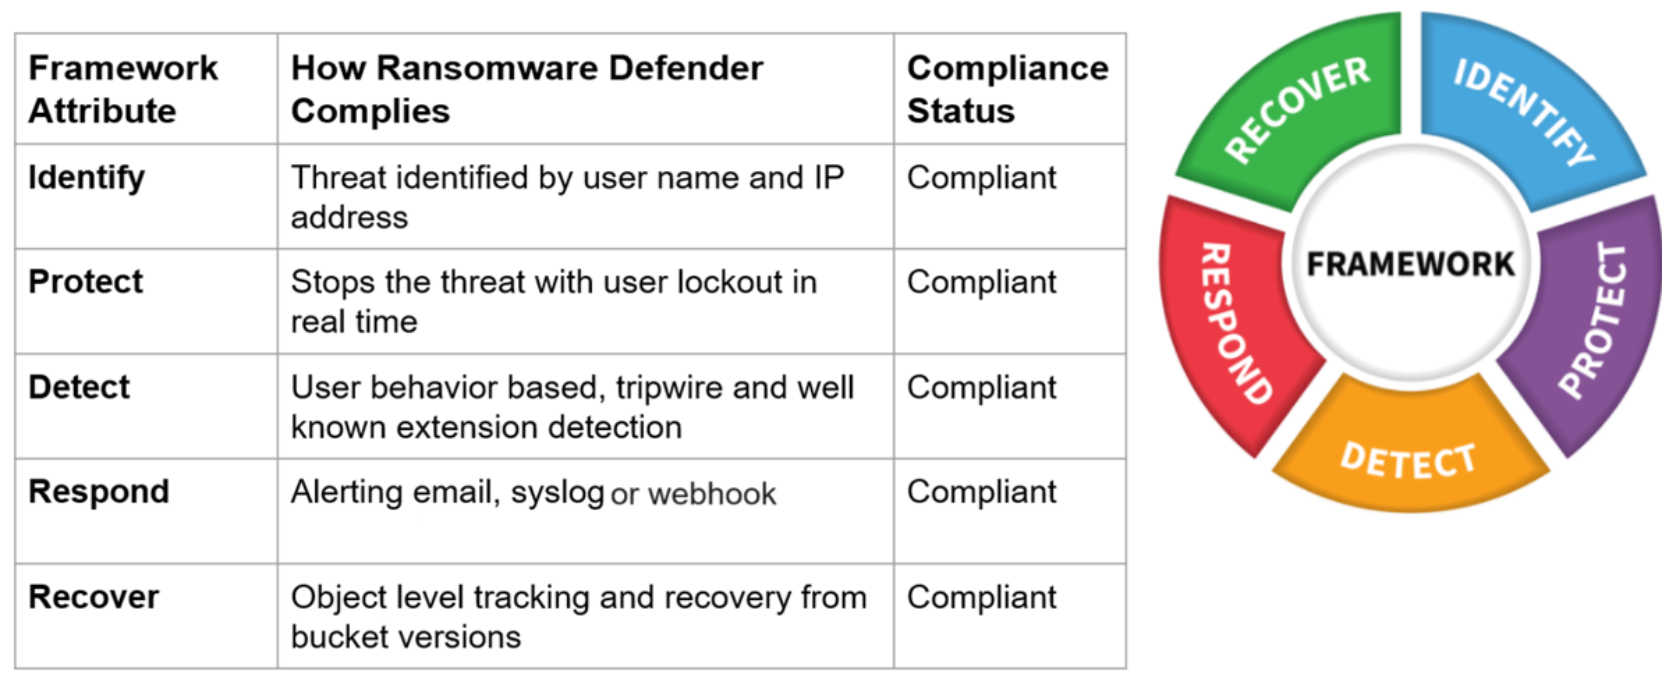 This is the Ransomware Defender compliance with NIST cybersecurity framework.